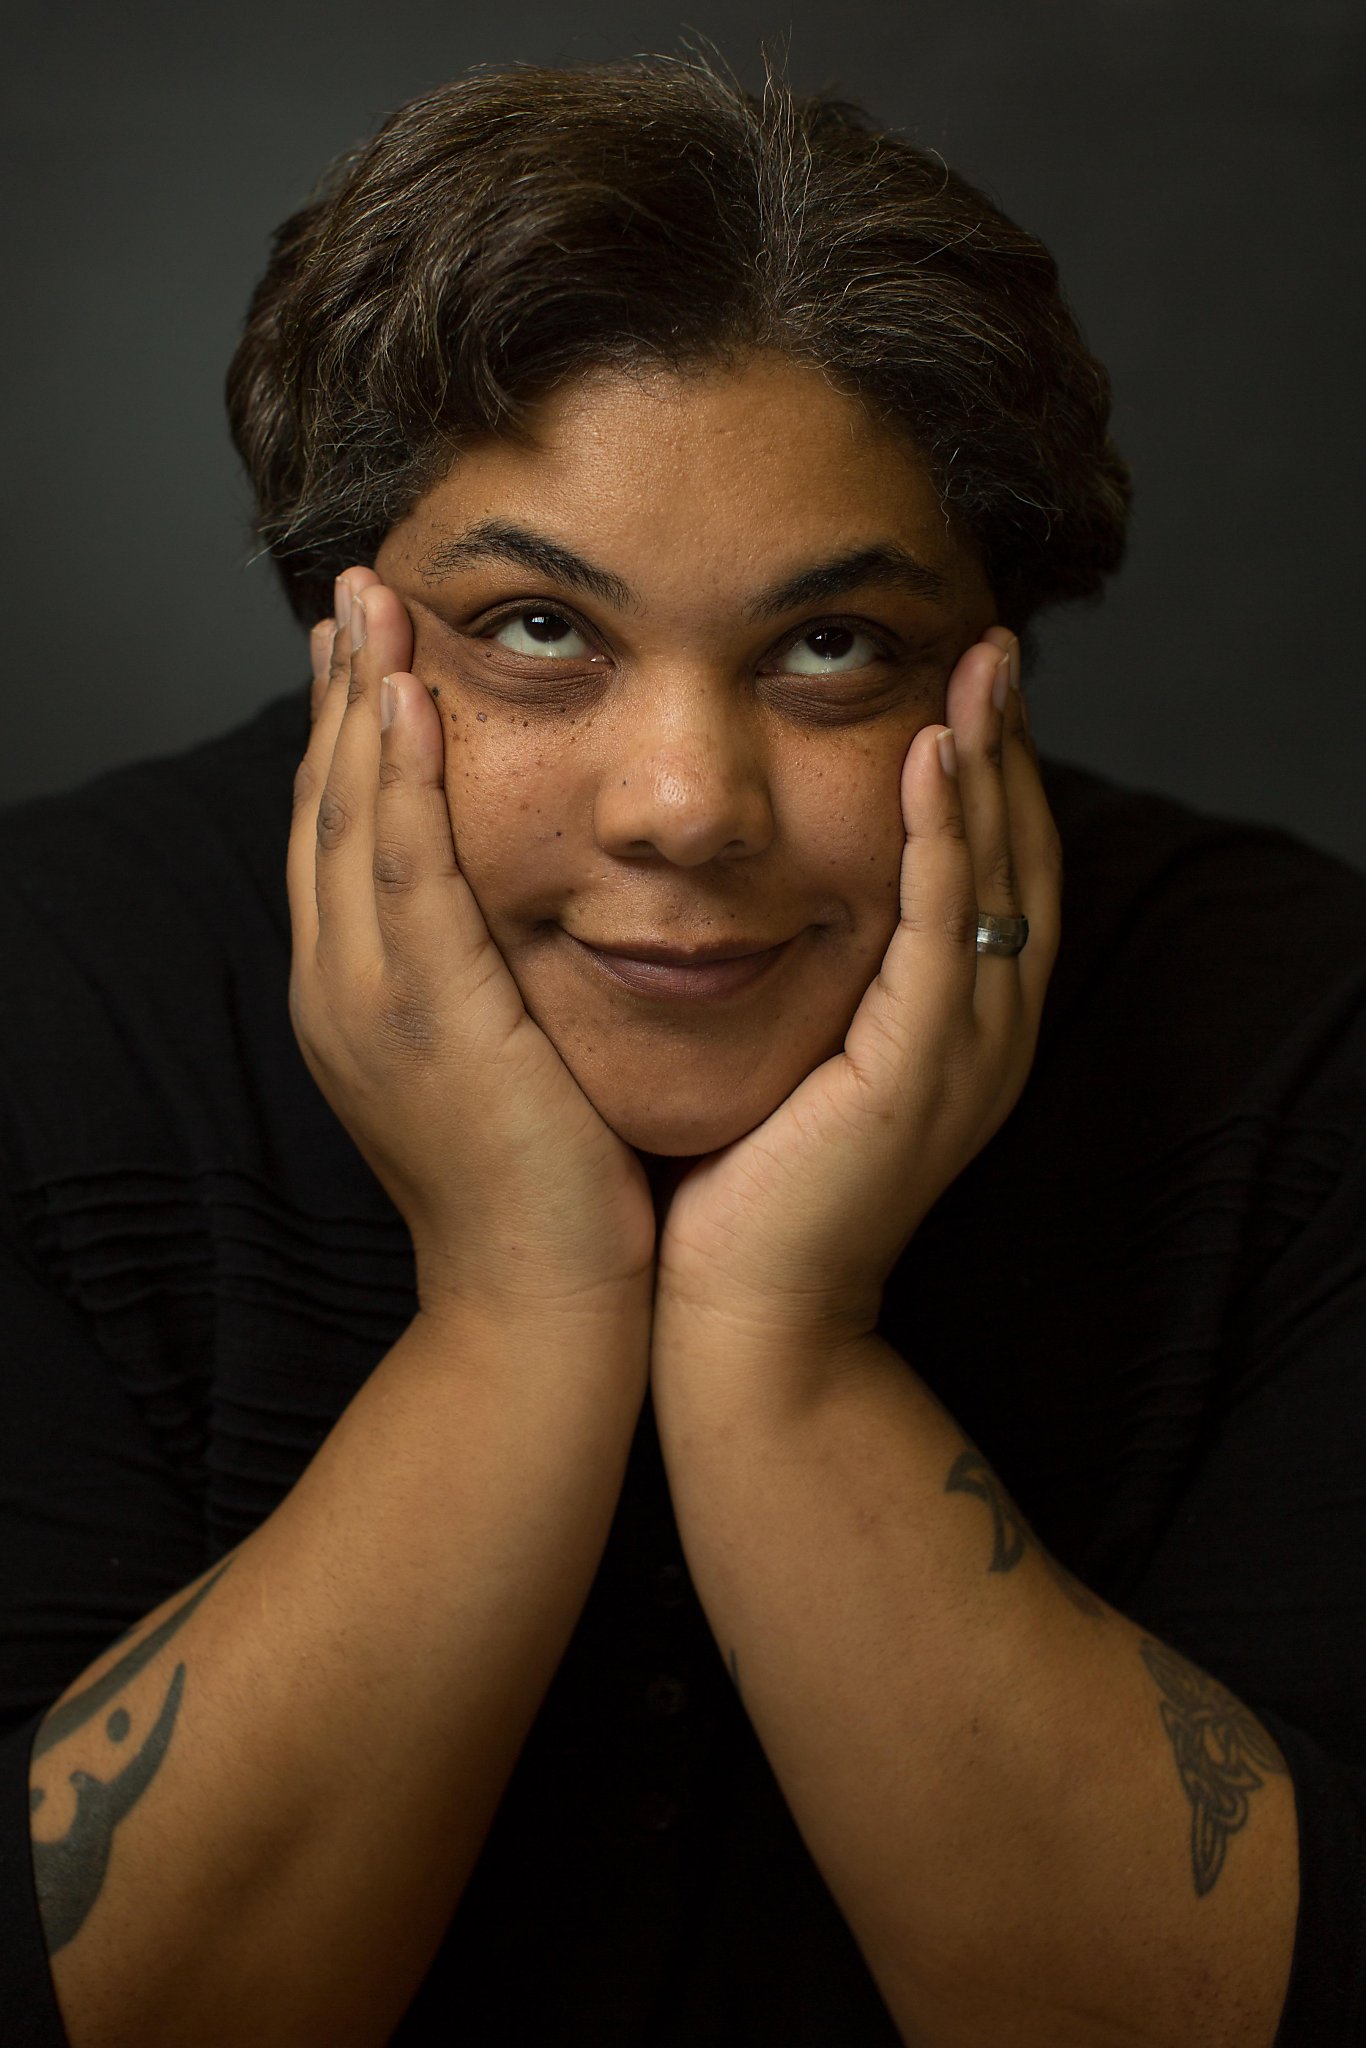 hunger by roxane gay goodreads